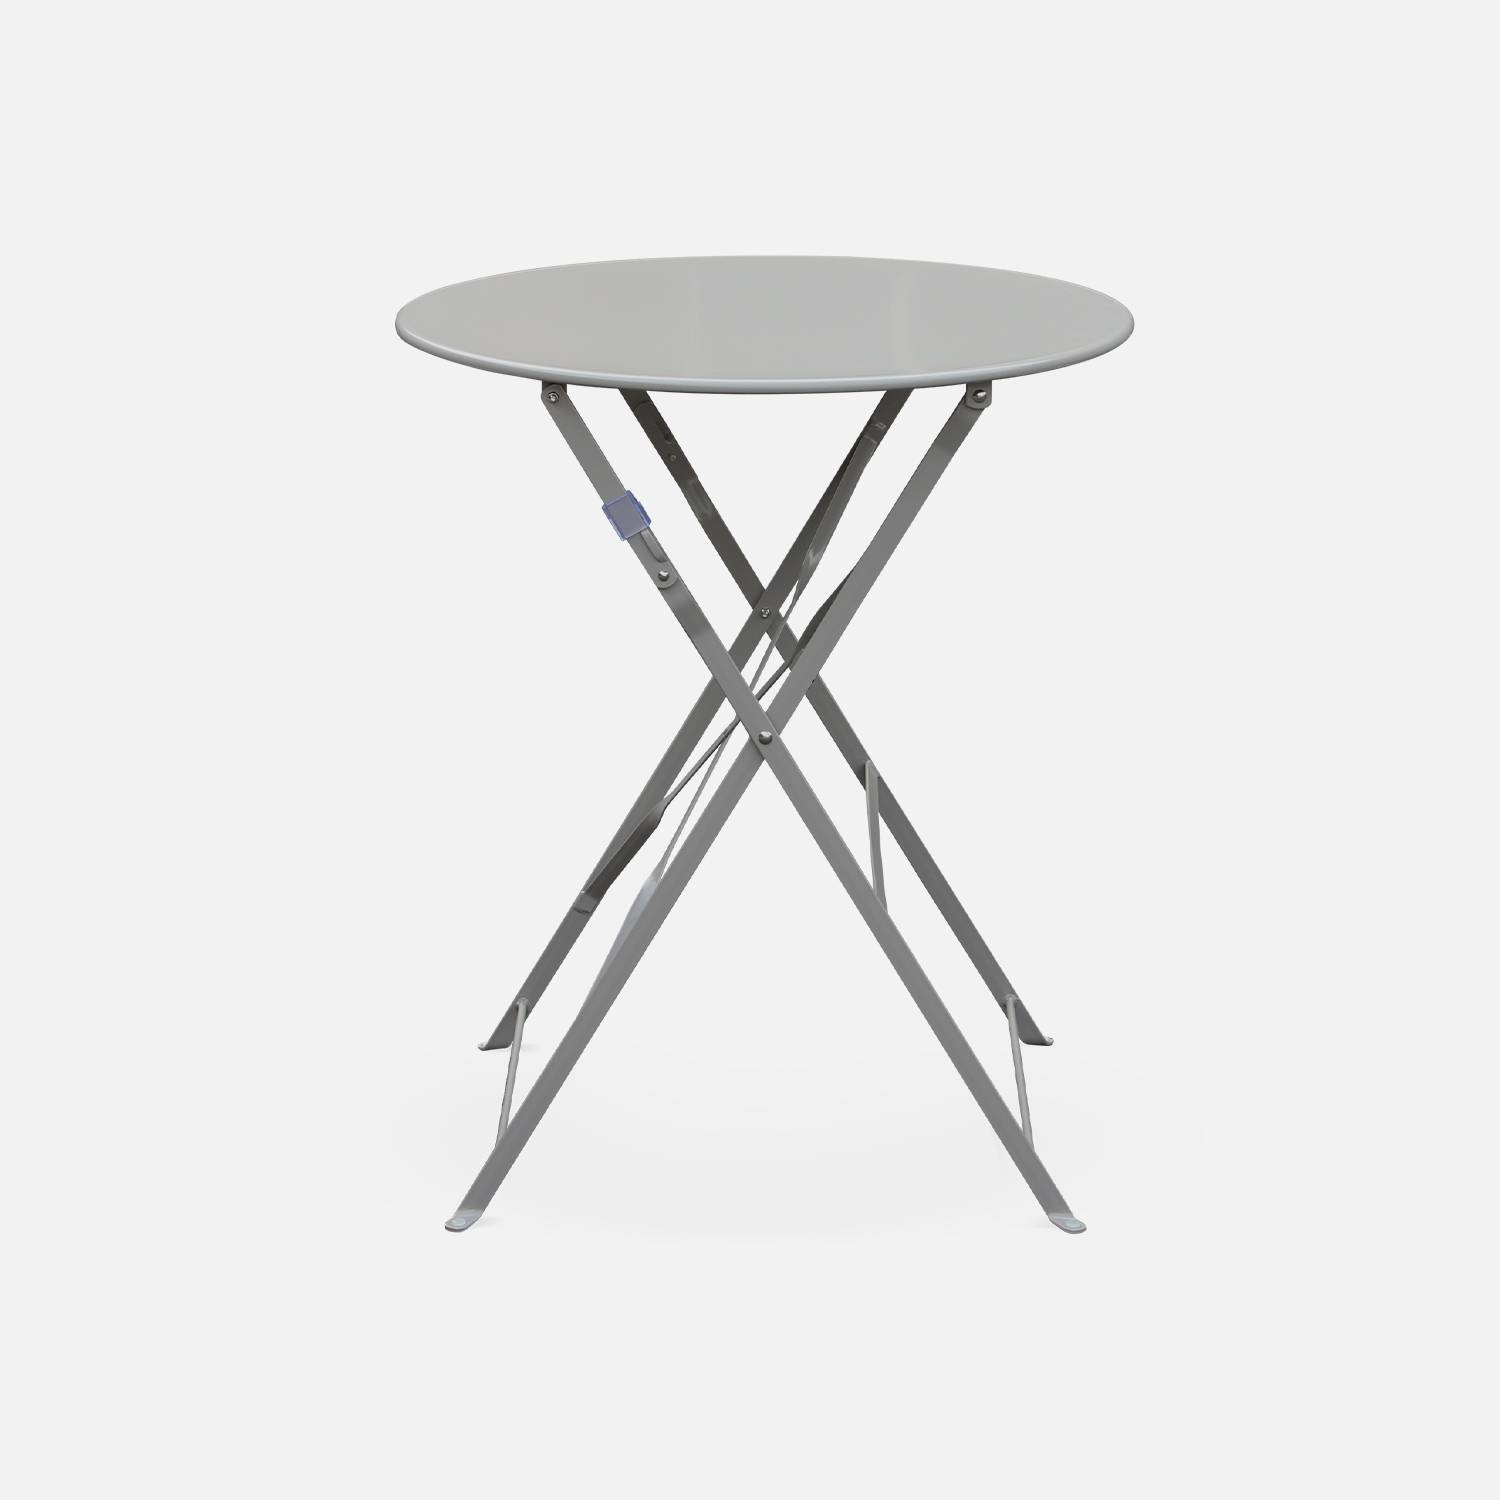 2-seater foldable thermo-lacquered steel bistro garden table with chairs, Ø60cm - Emilia - Taupe grey Photo3